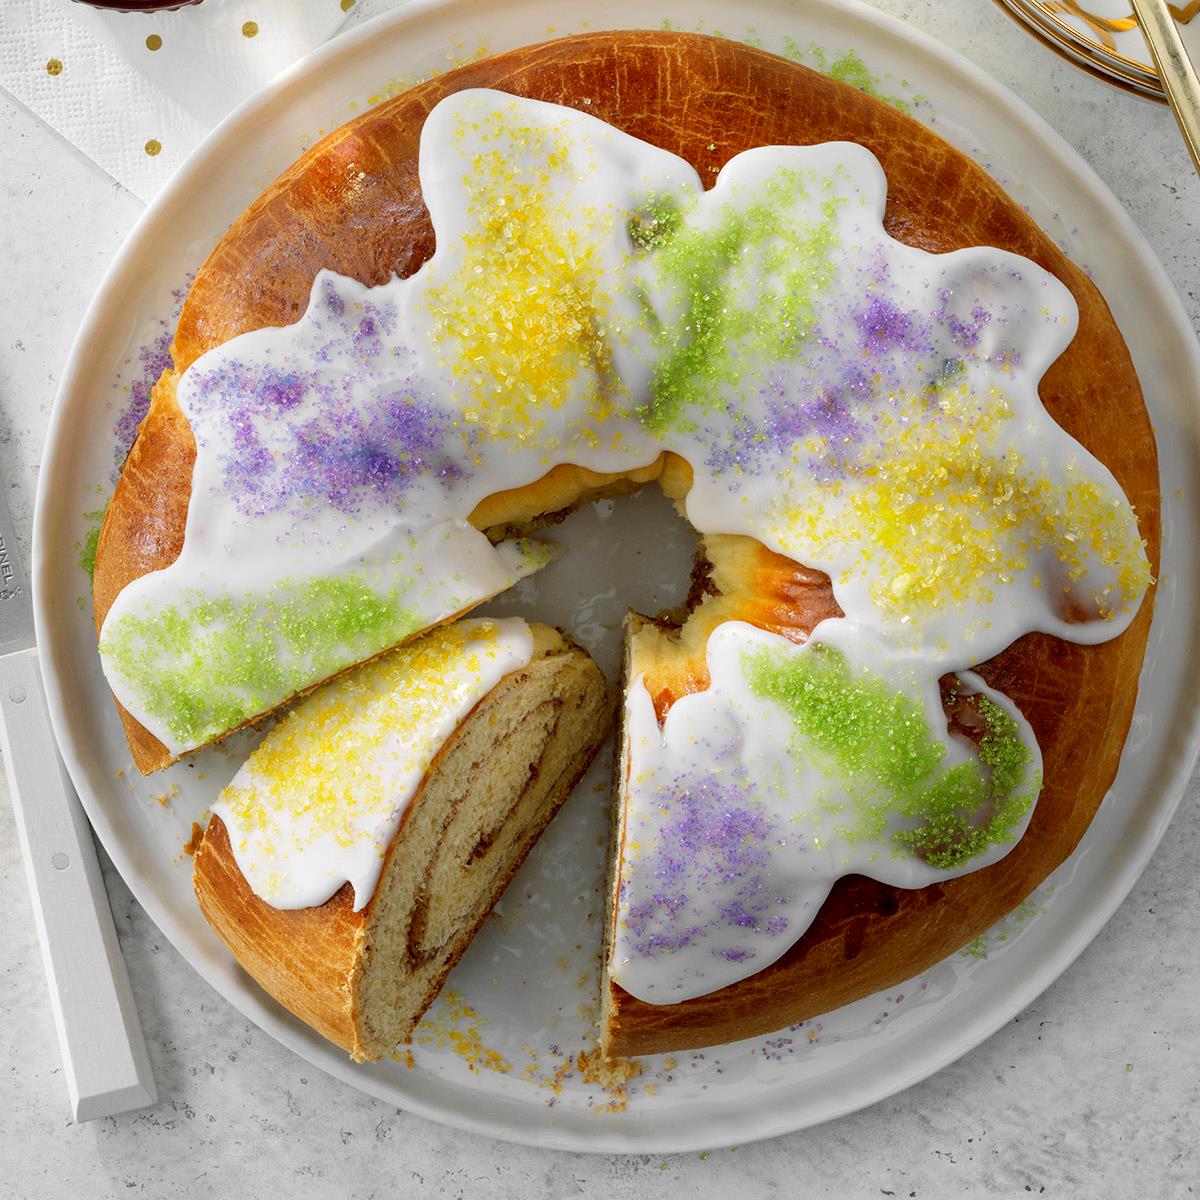 The Real Meaning Behind The Mardi Gras King Cake